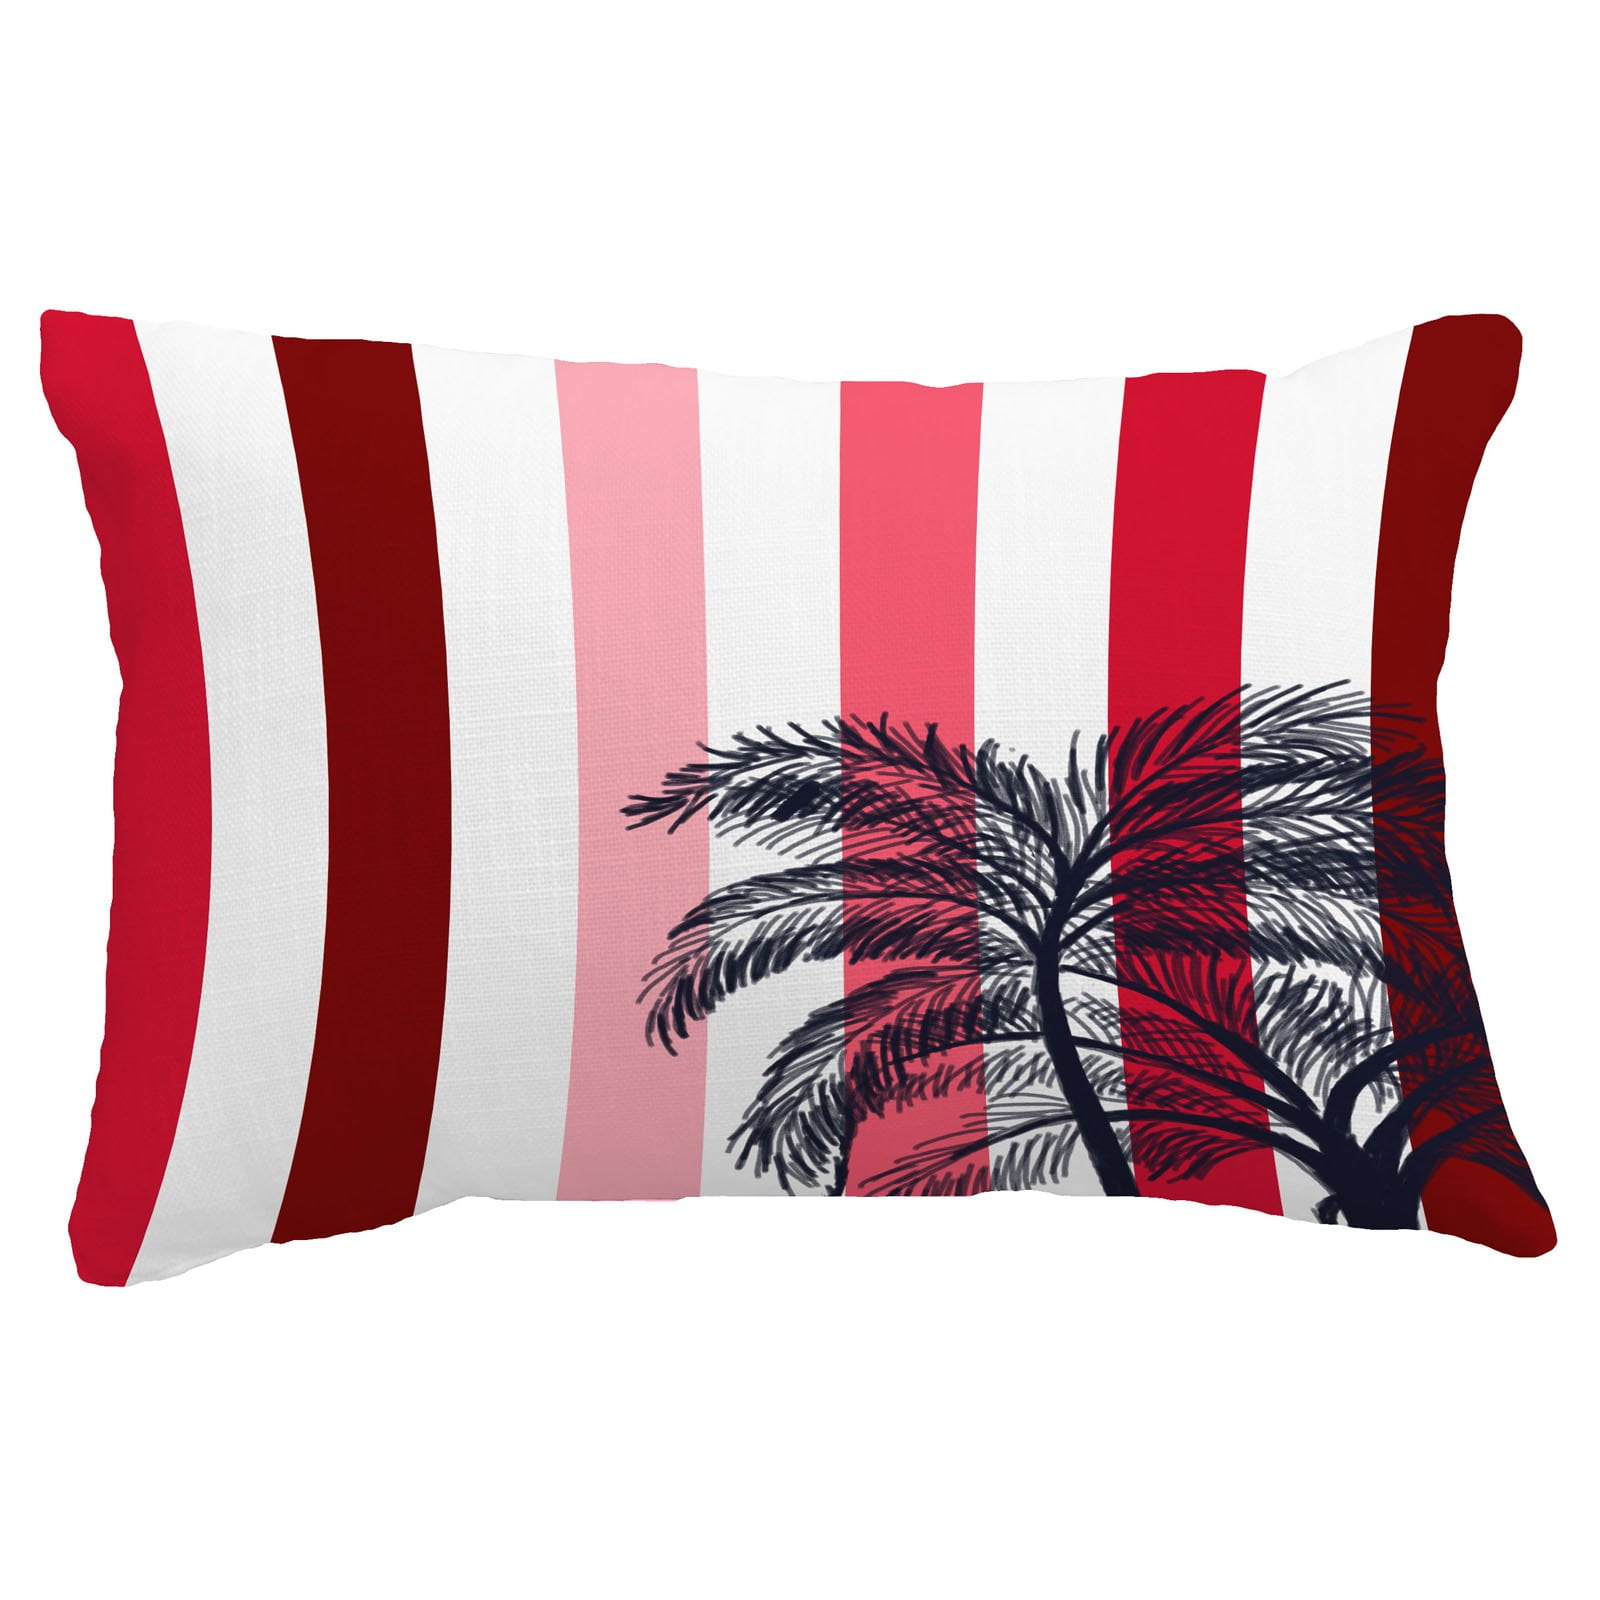 Red Ebydesign Ombre Decorative Pillow 